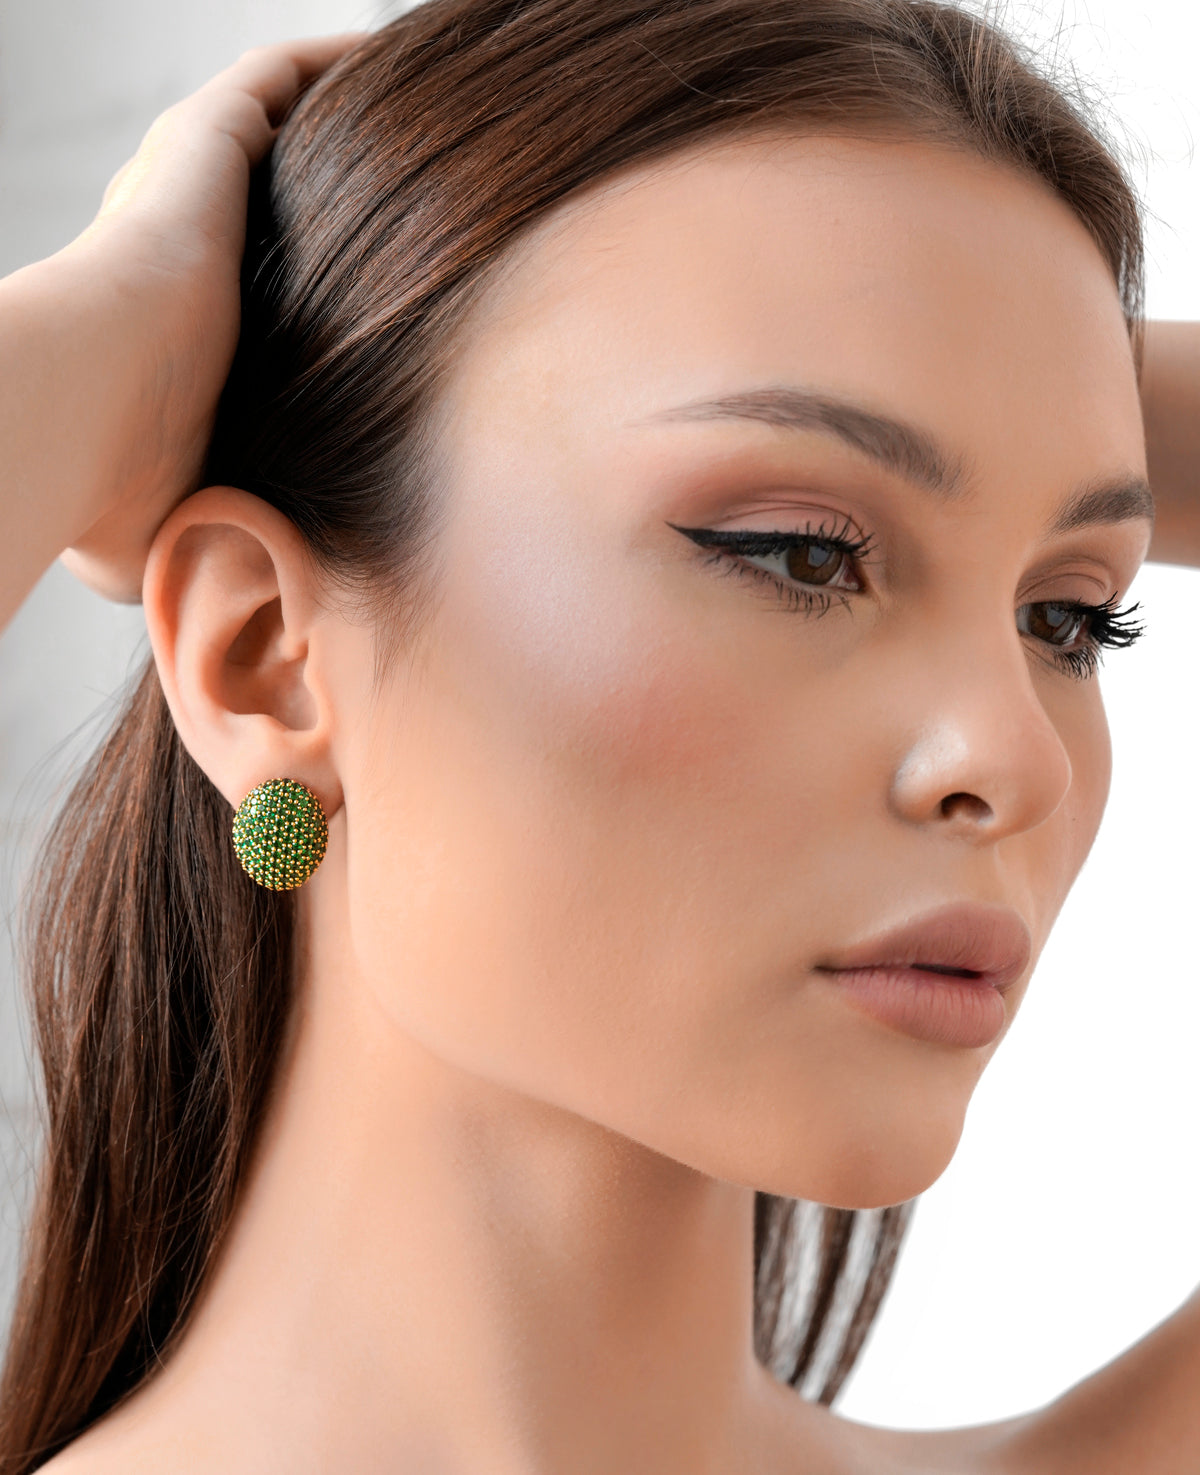 The Statement Earrings - Yellow Gold Emerald